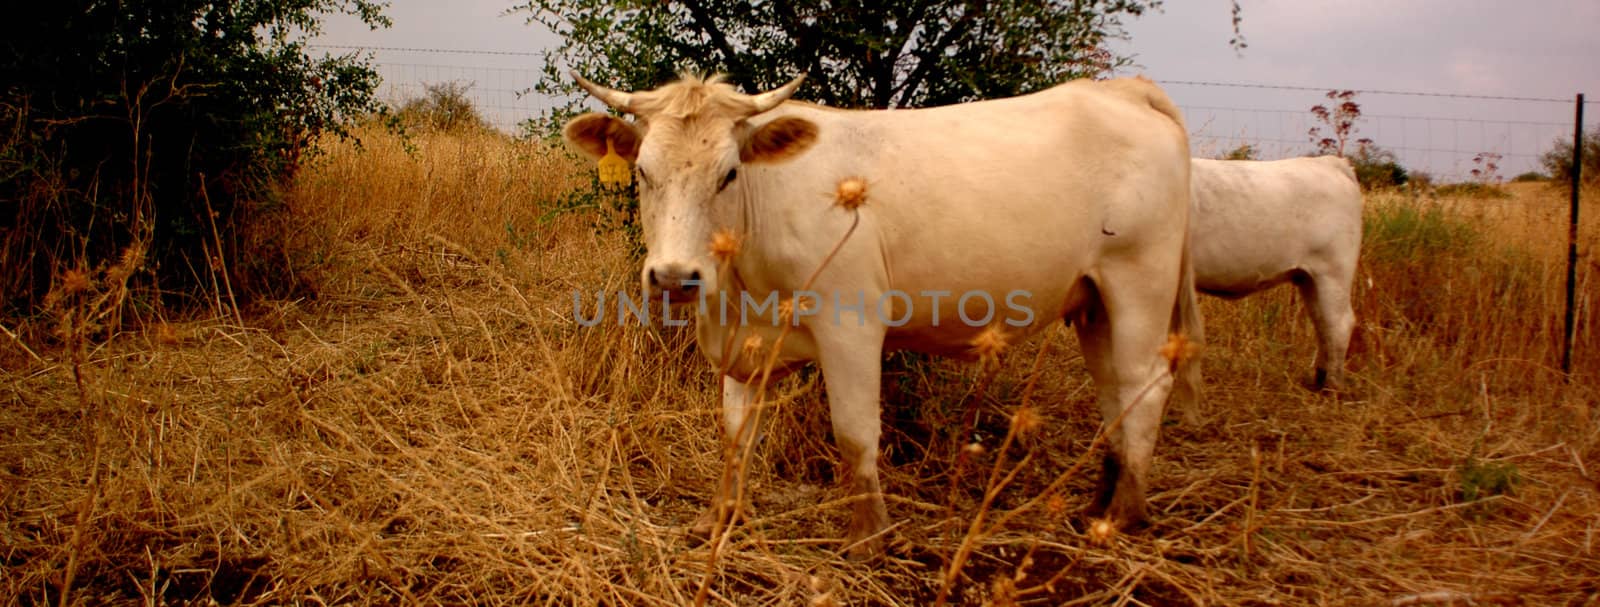 Cow in Israel by eugenef